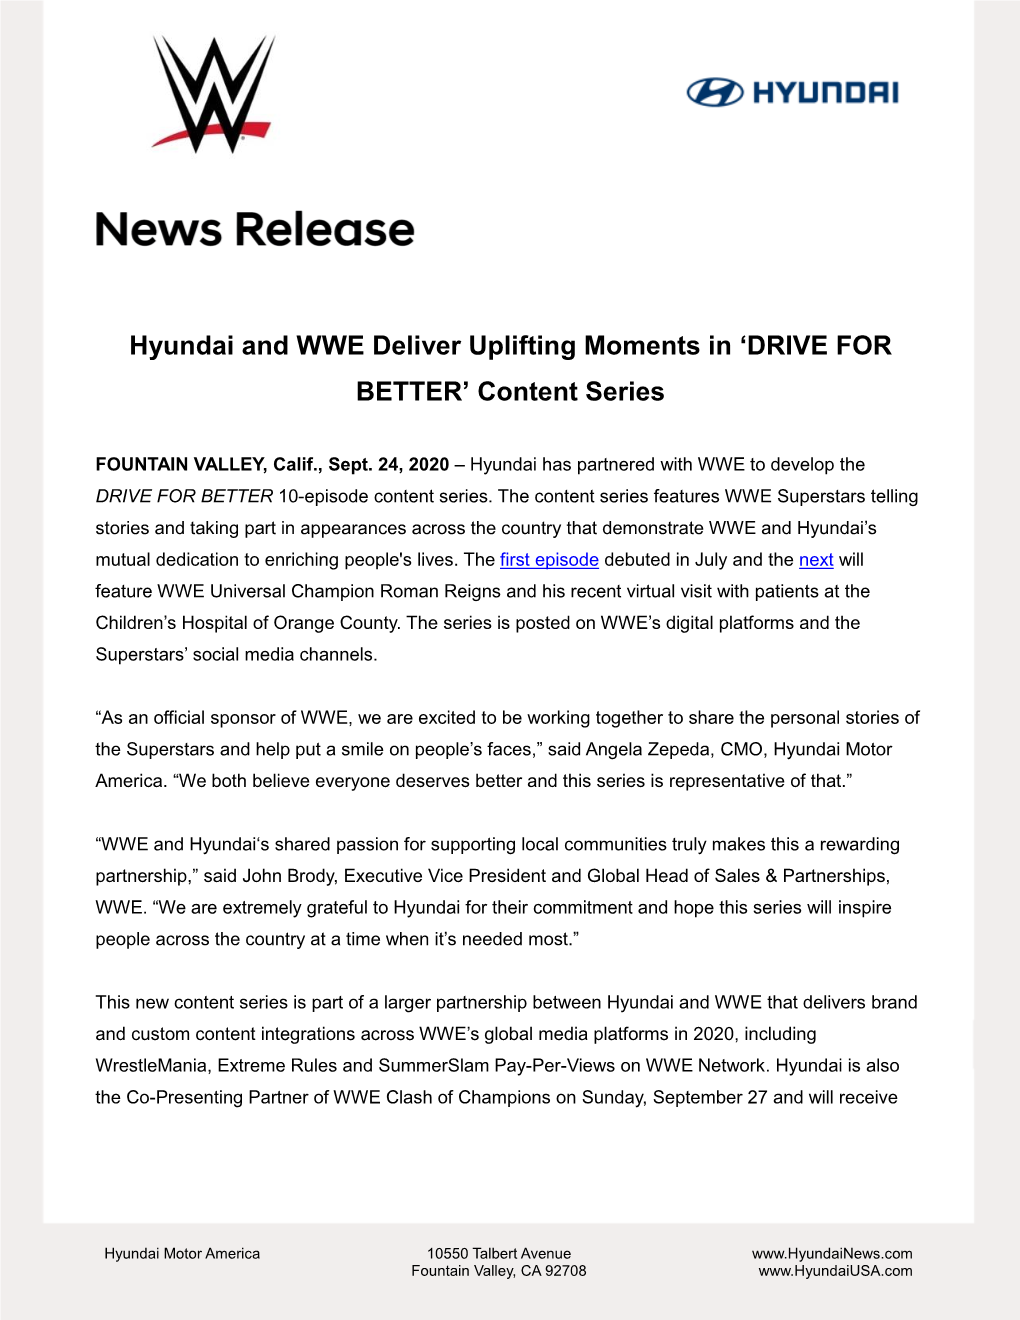 Hyundai and WWE Deliver Uplifting Moments in 'DRIVE for BETTER